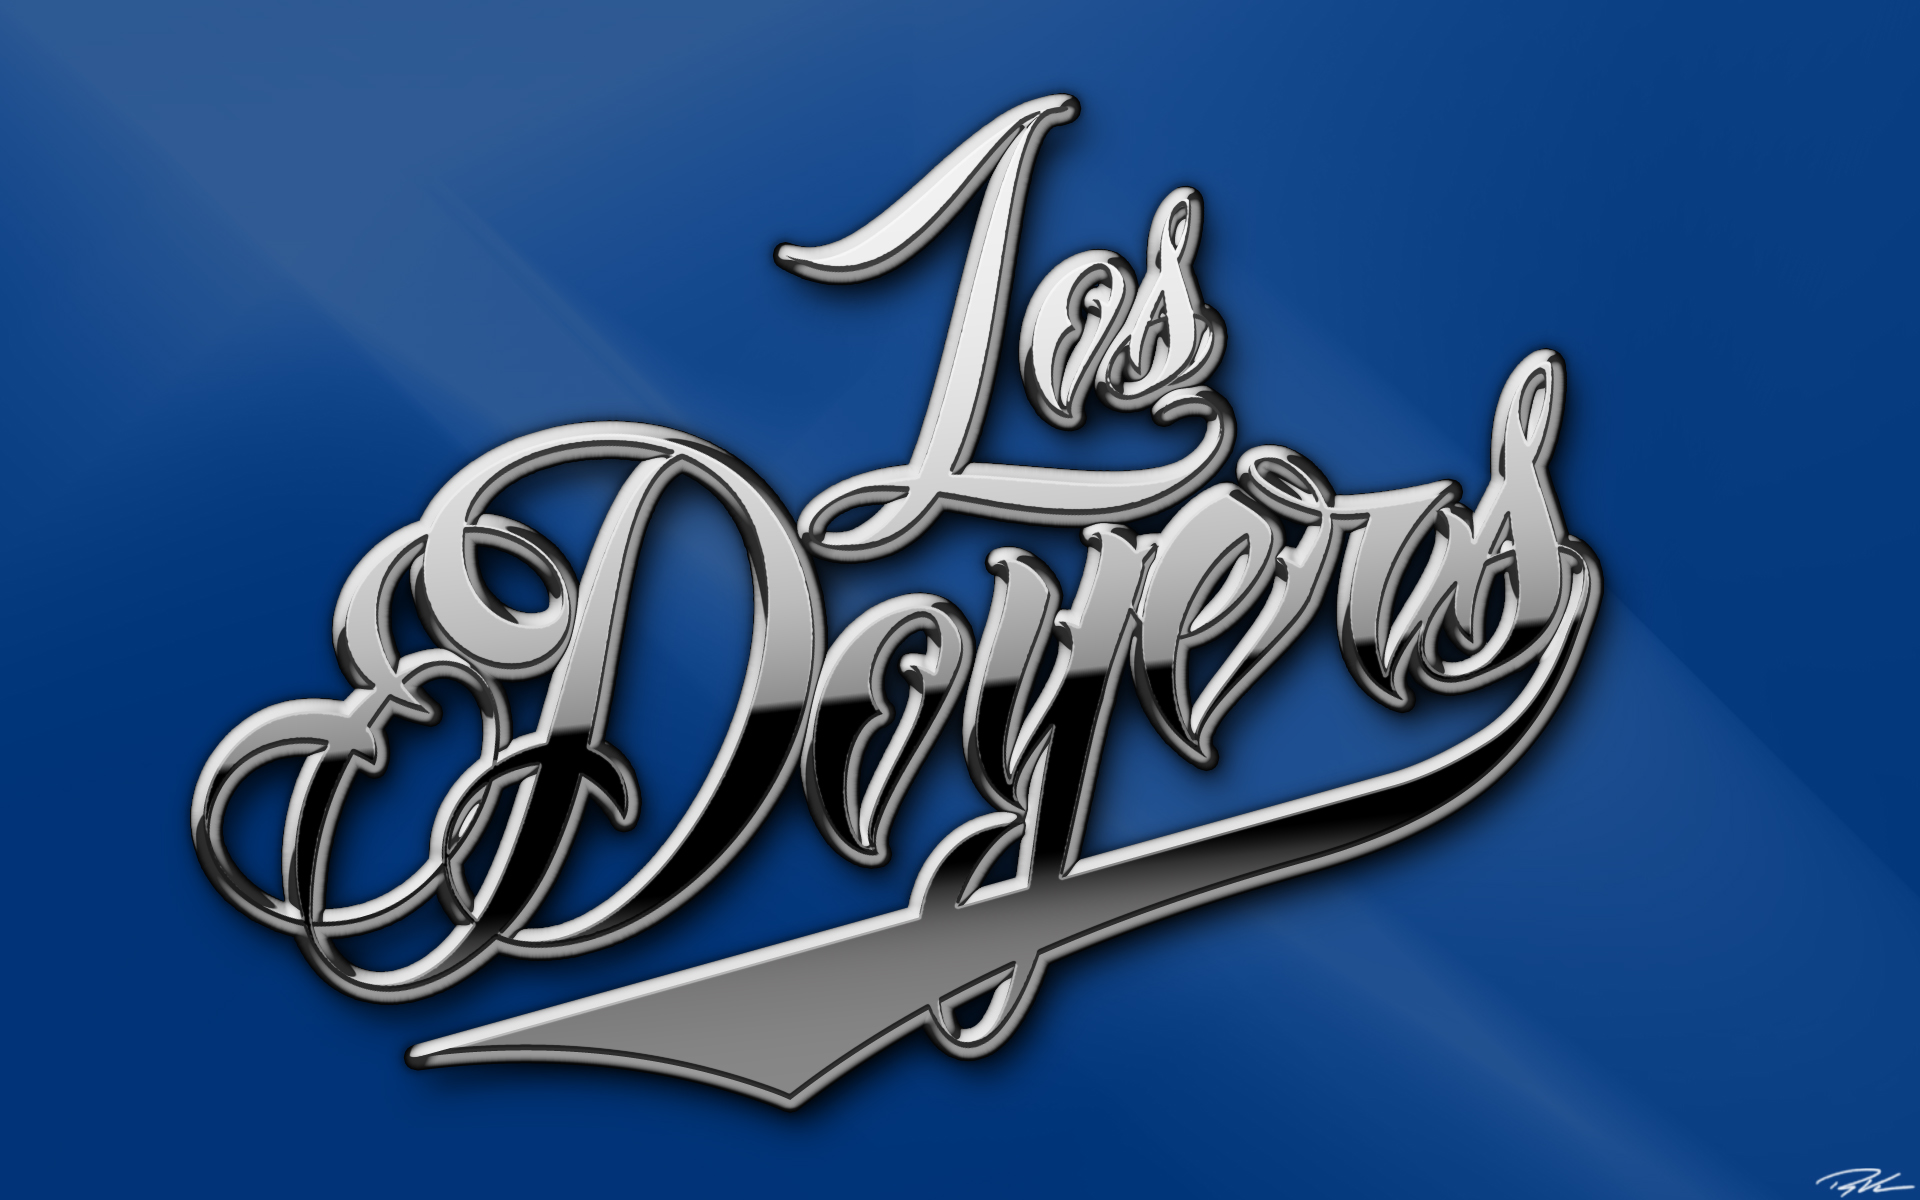  Angeles Dodgers wallpapers Los Angeles Dodgers background   Page 2